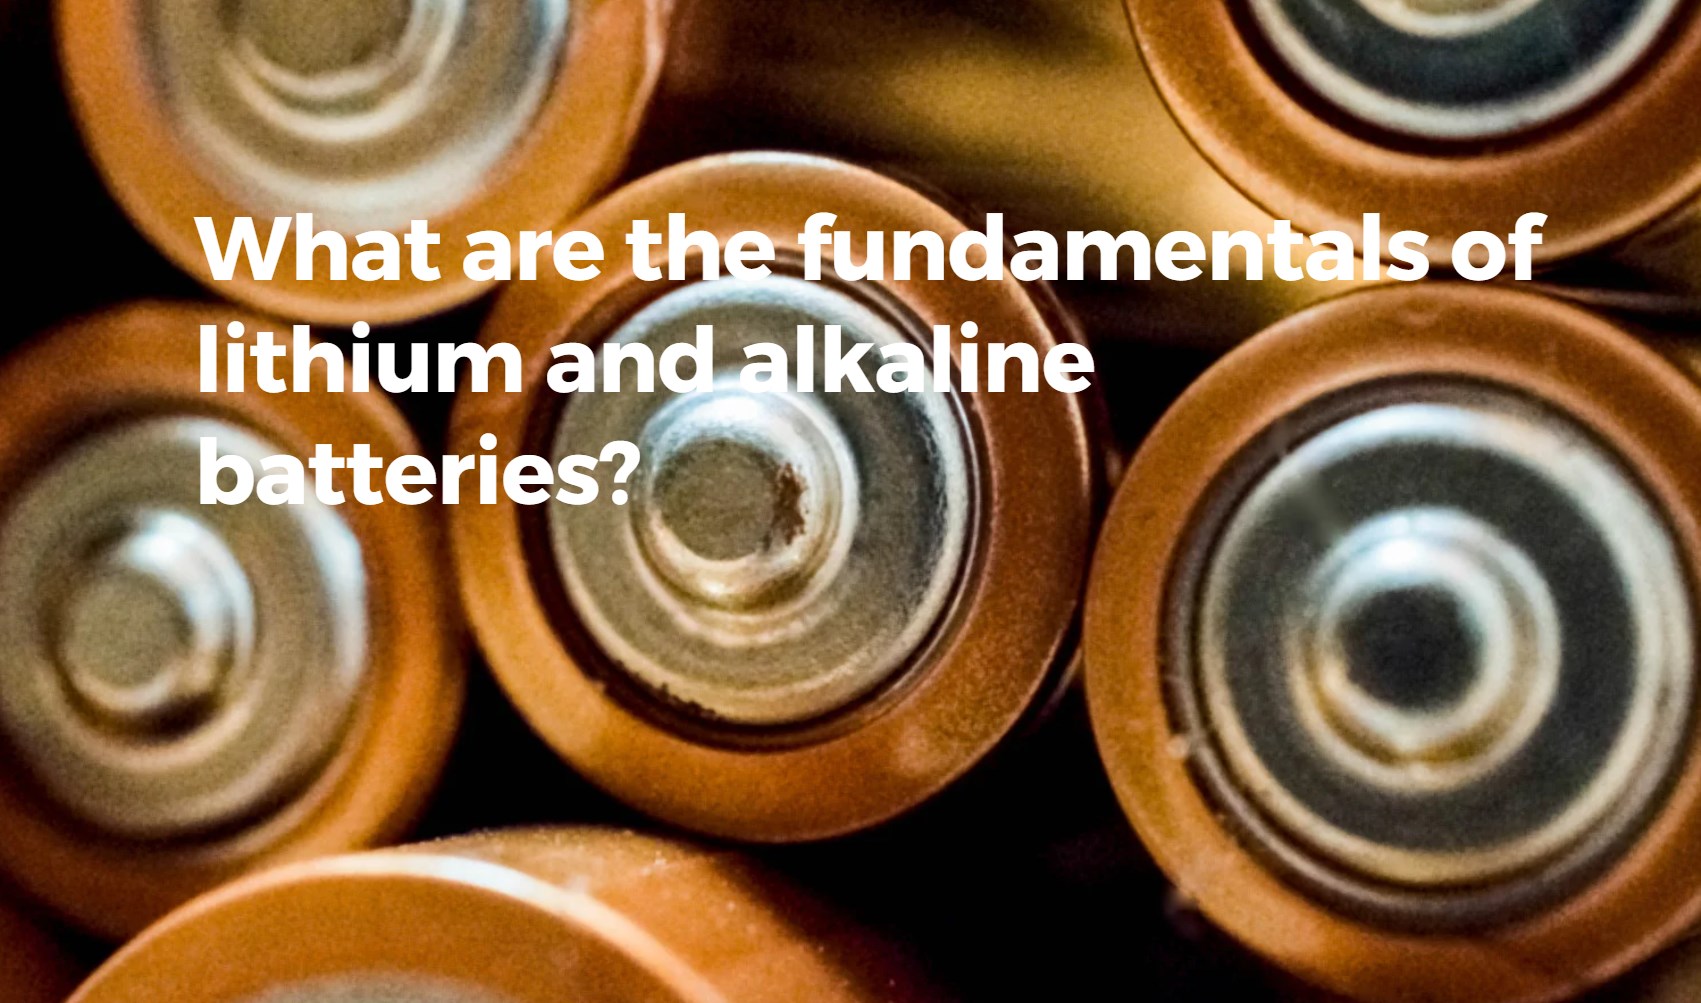 What are the fundamentals of lithium and alkaline batteries?